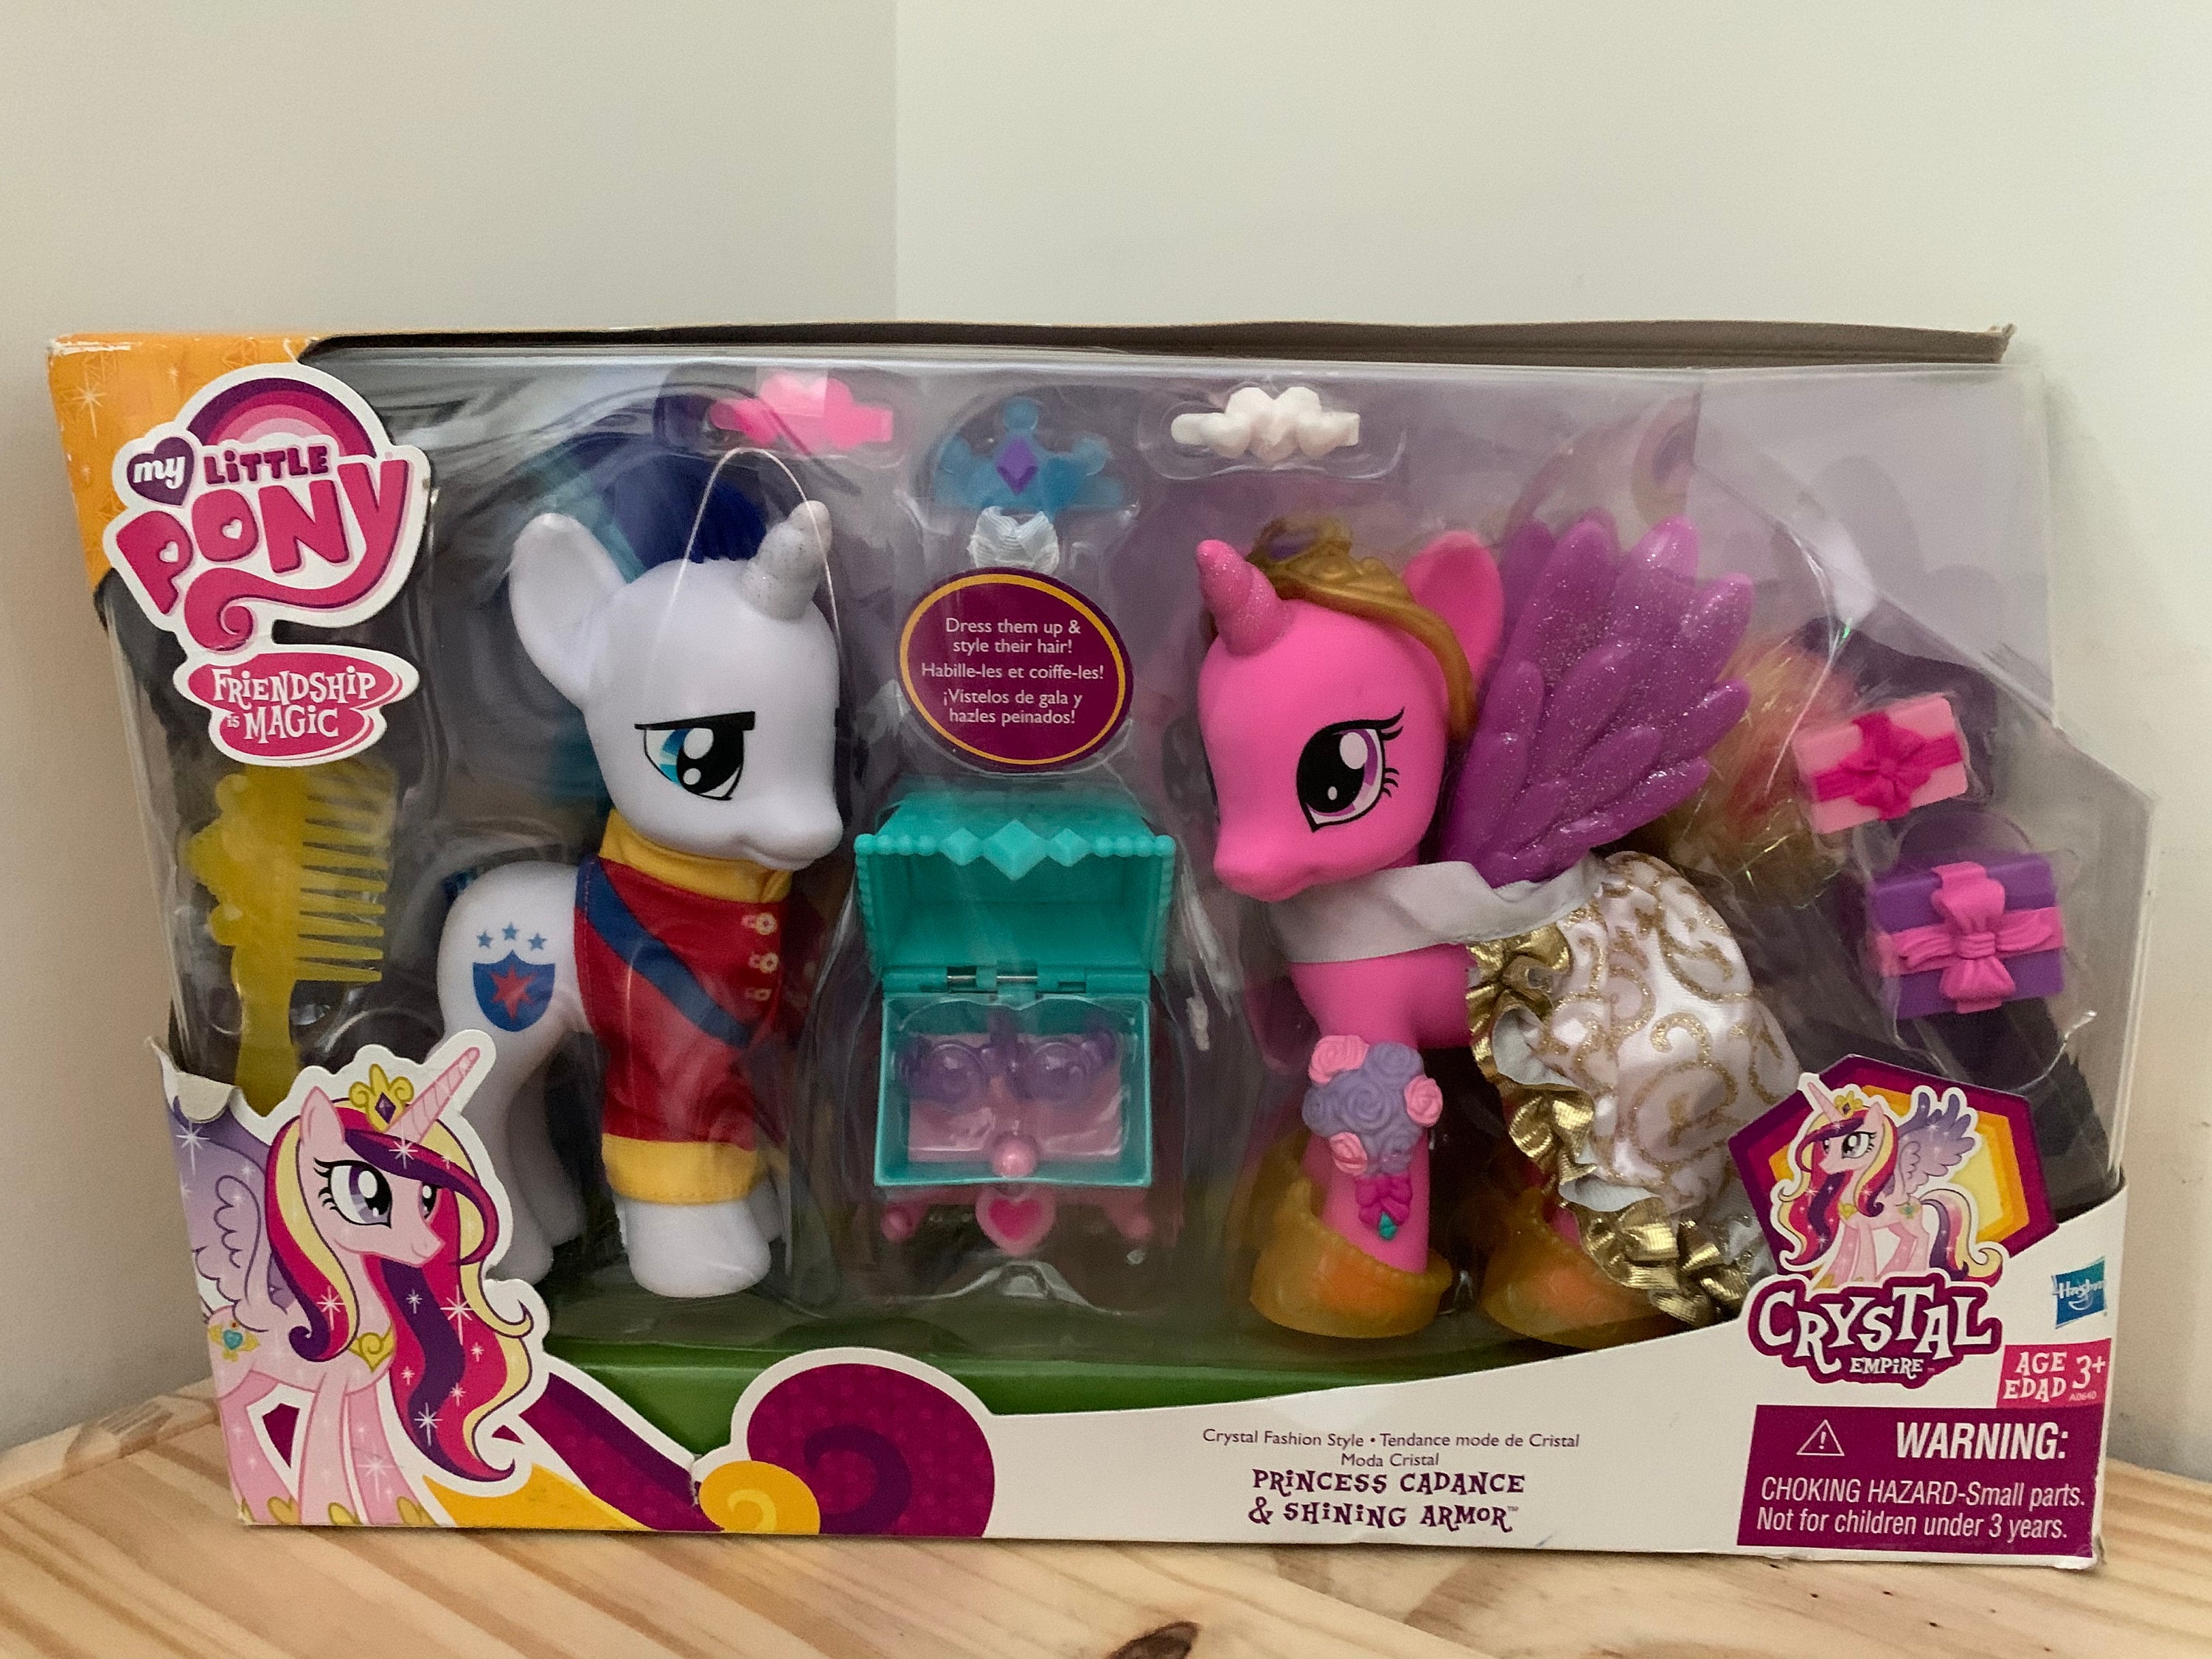 Lot of My Little Pony G4 MLP Crystal Empire Pinkie Pie bath Accessories 